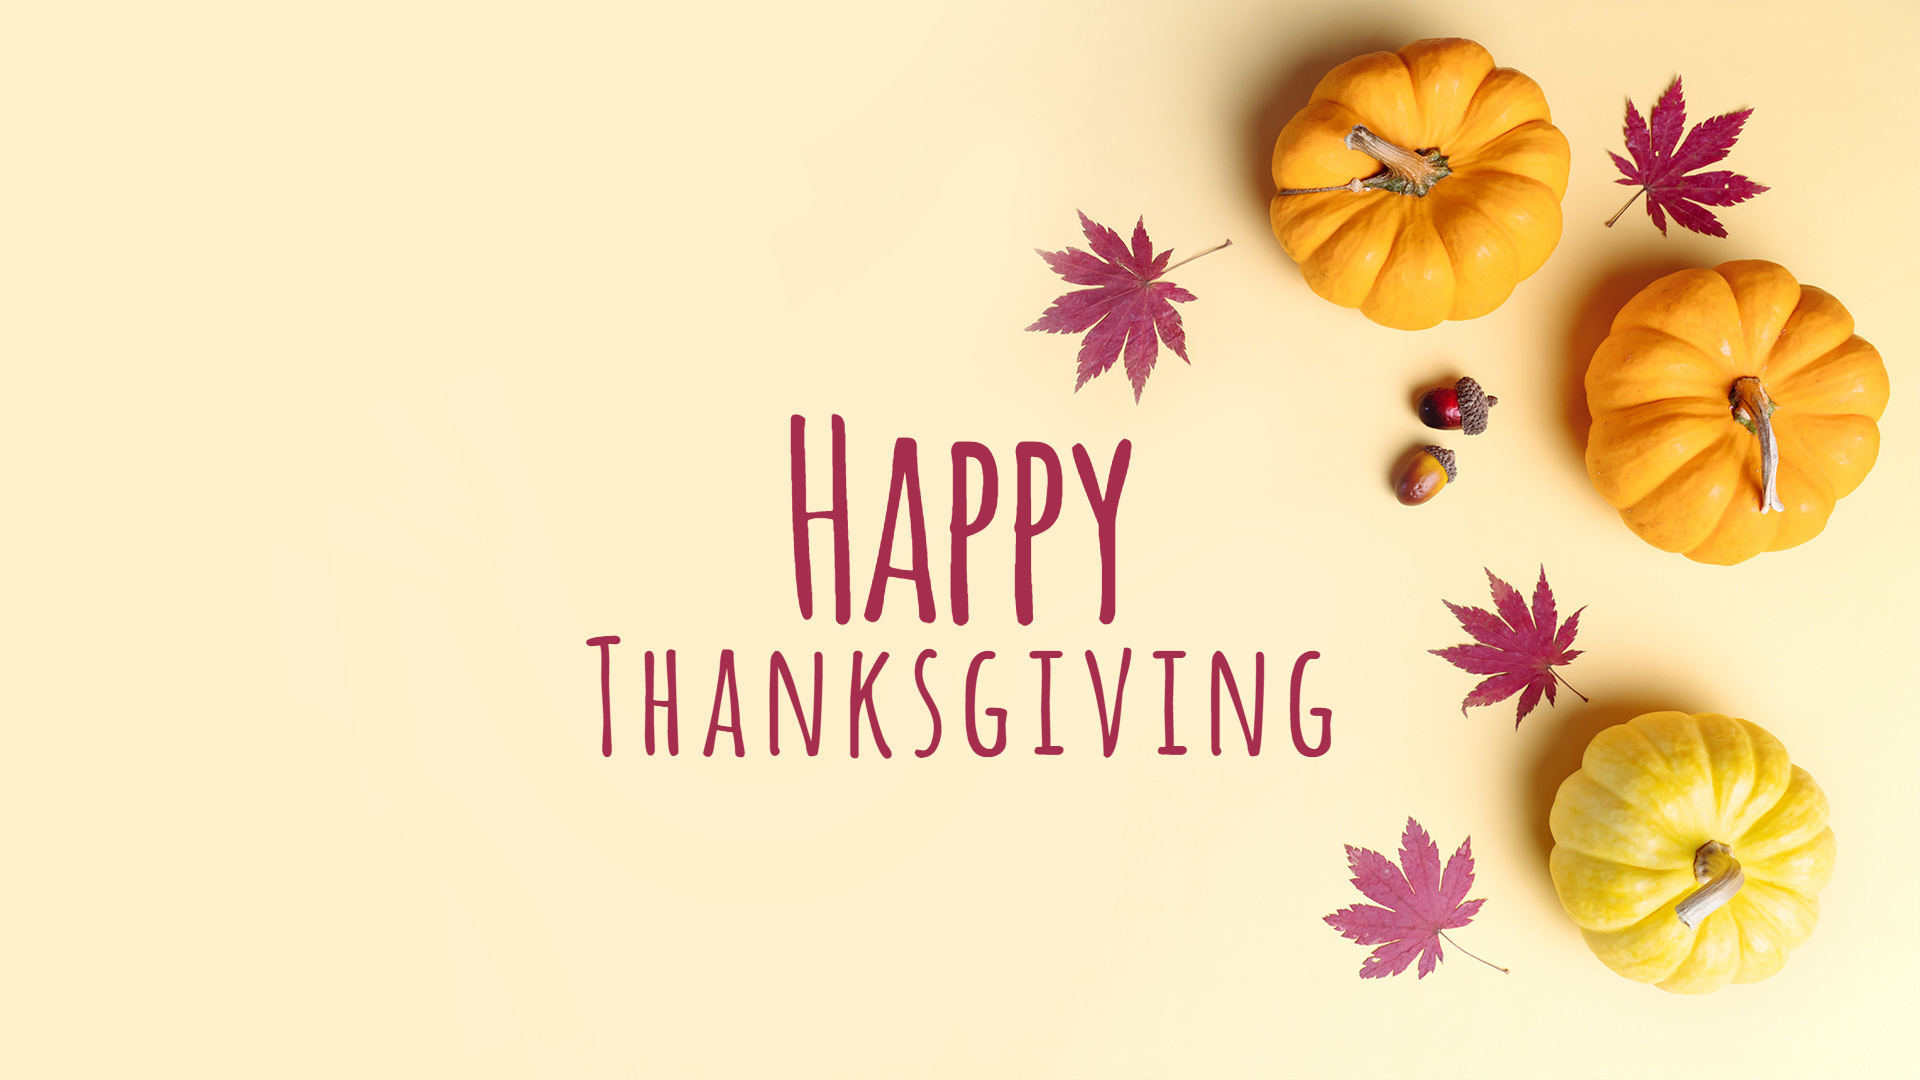 20+ Thanksgiving Wallpapers & Backgrounds for Your Holiday Celebration 2022  | Fotor